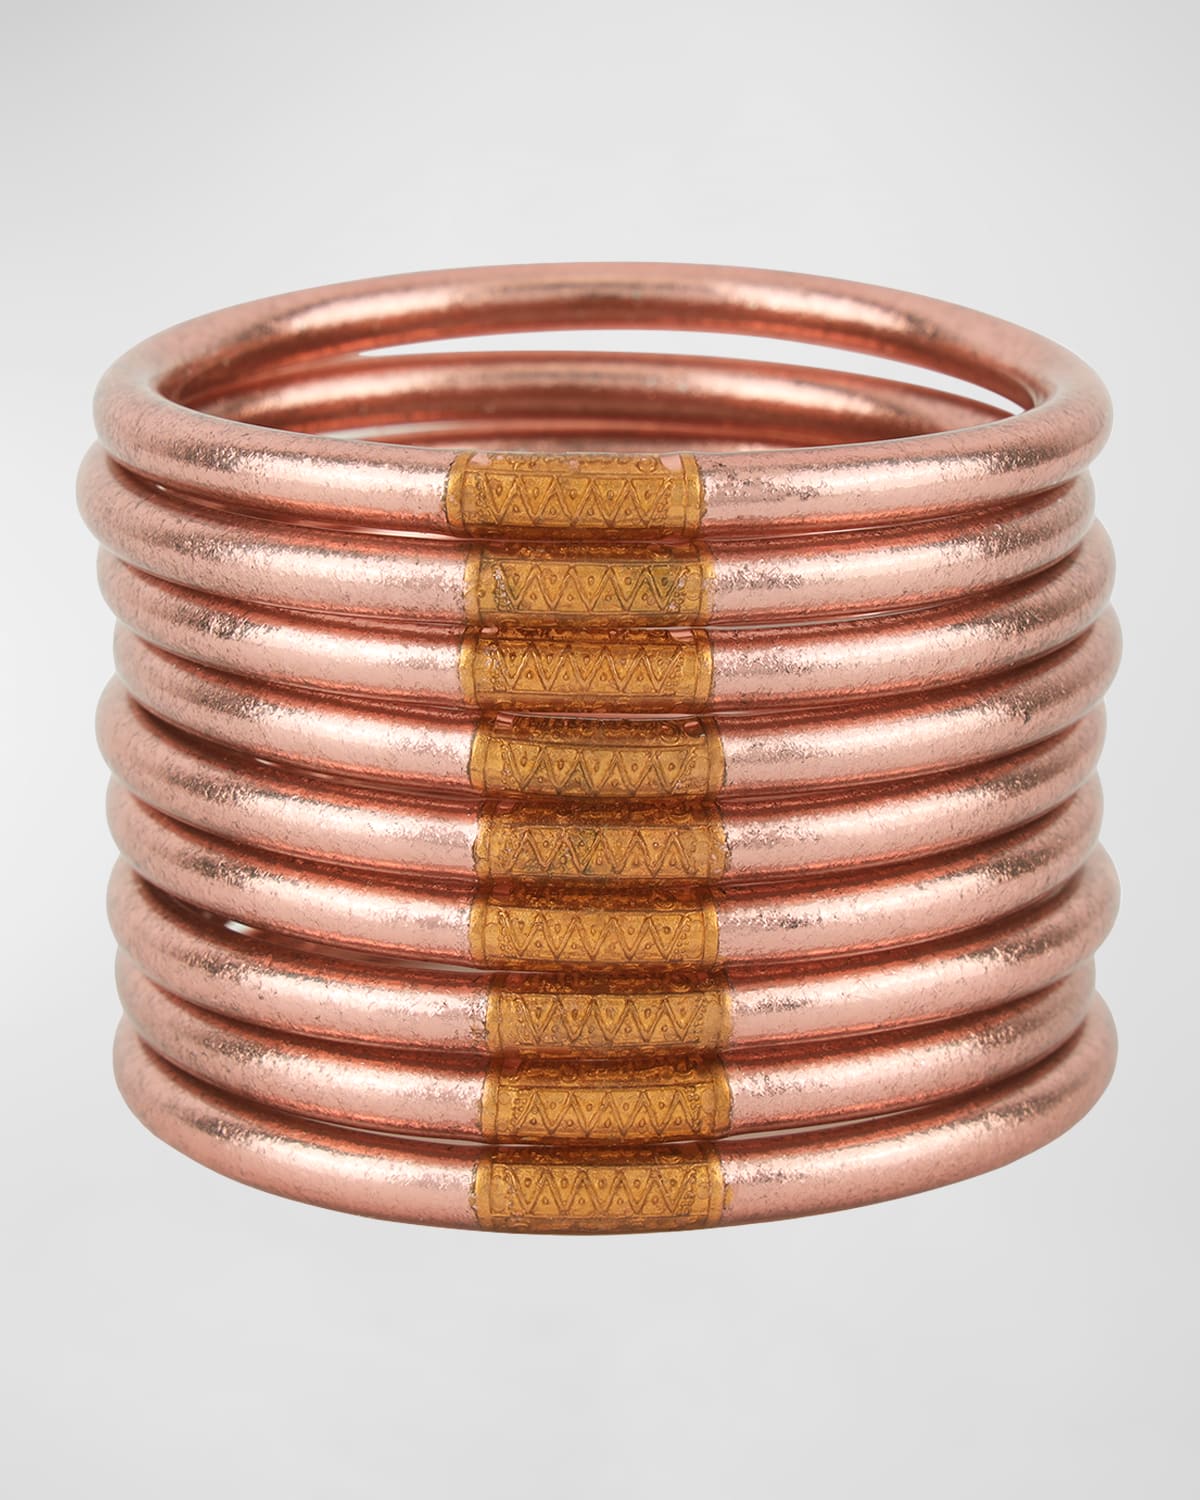 Rose Gold All-Weather Bangles, Size S-L, Set of 9